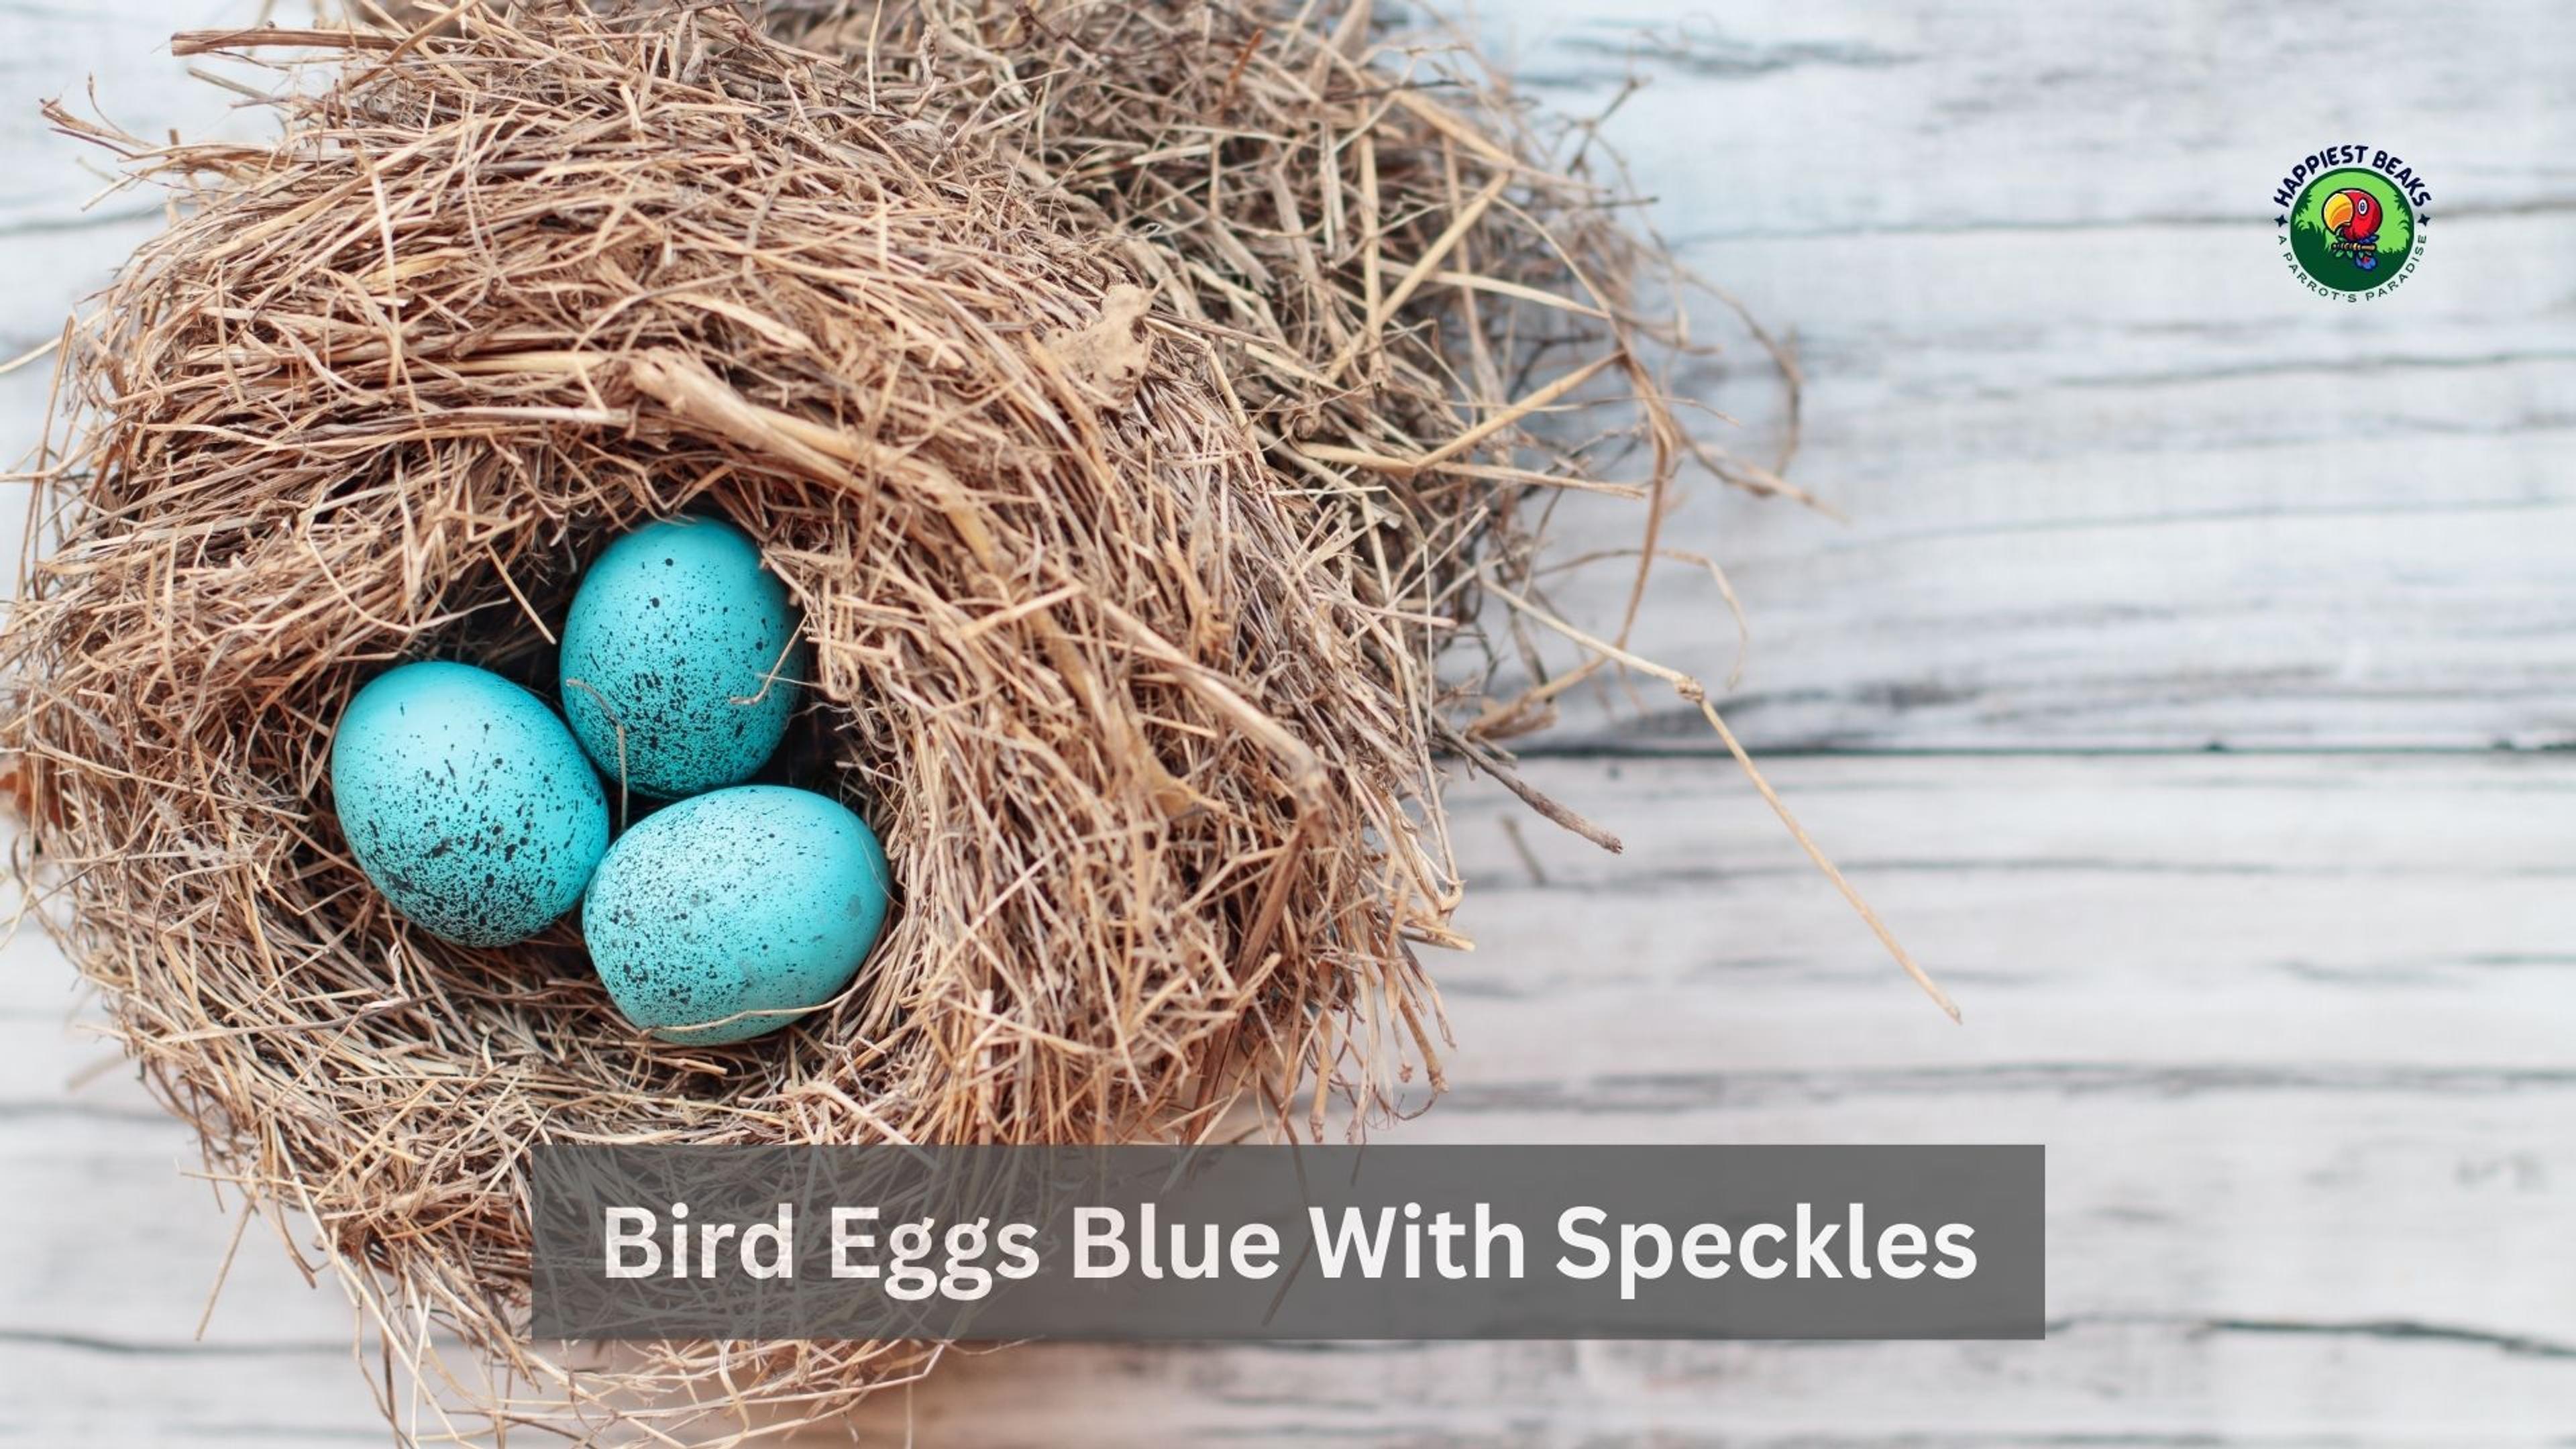 Bird Eggs Blue With Speckles